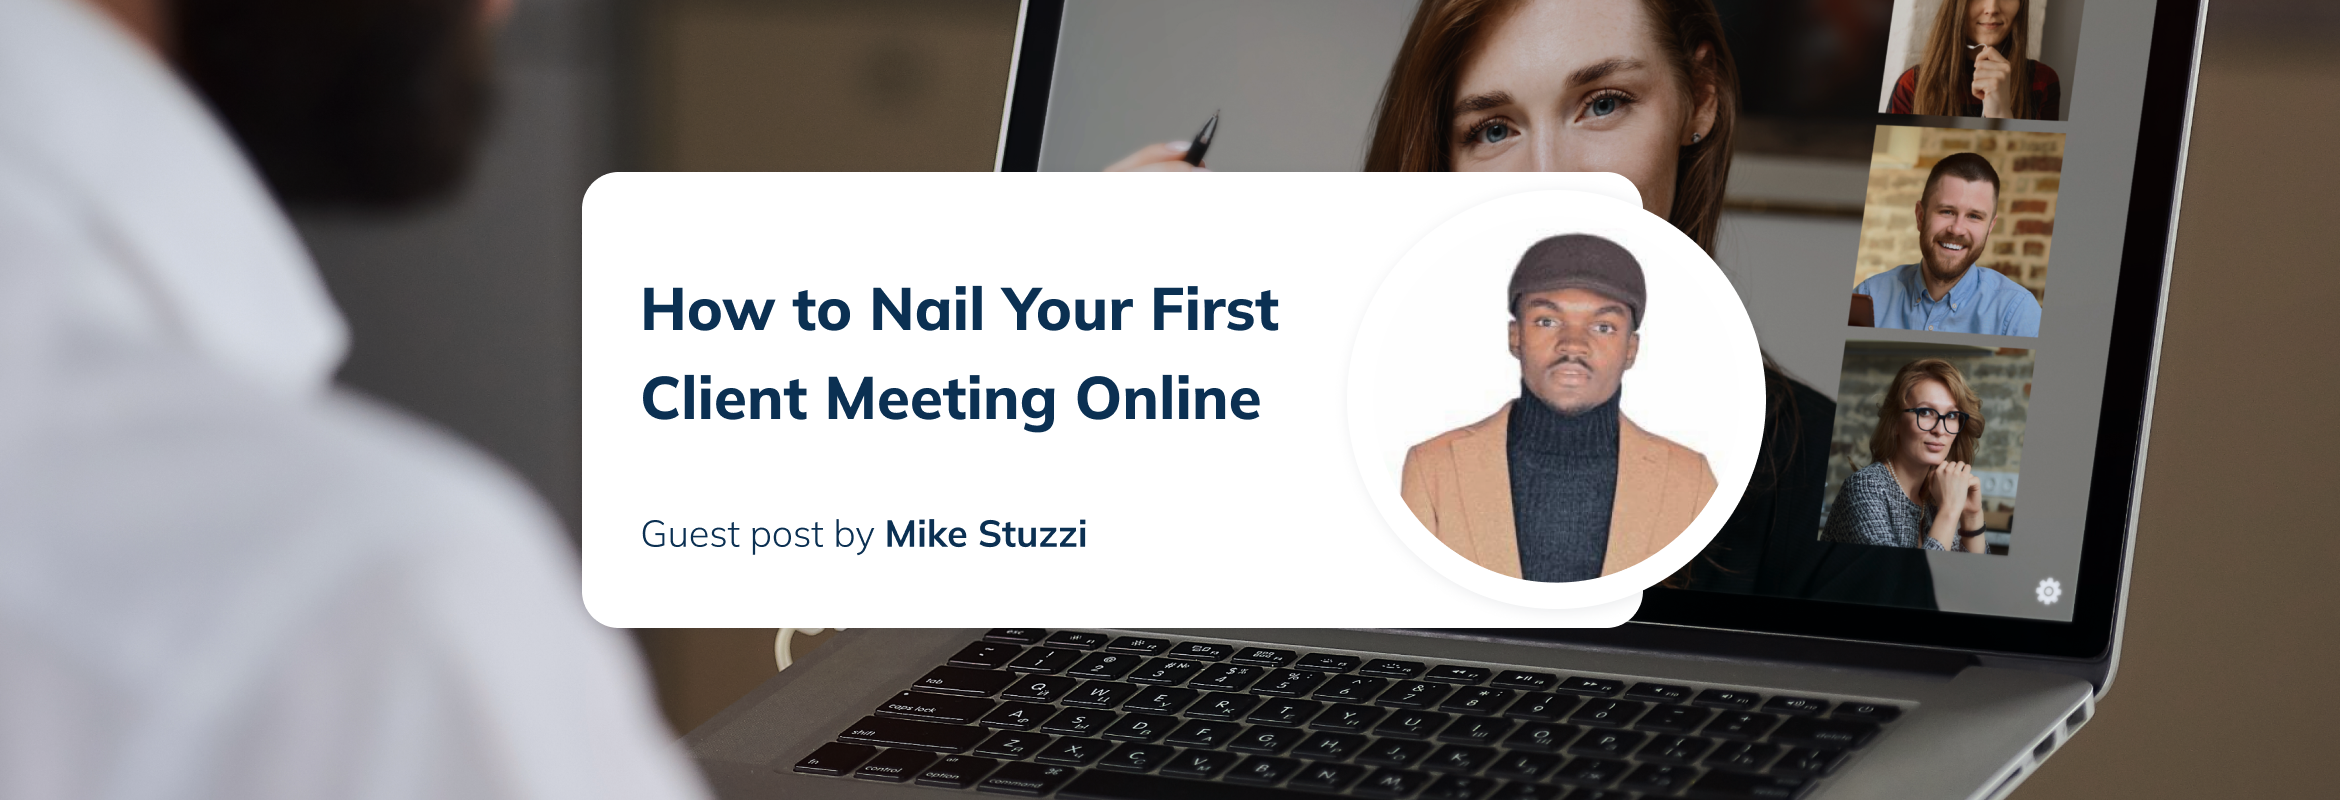 How to Nail Your First Online Client Meeting